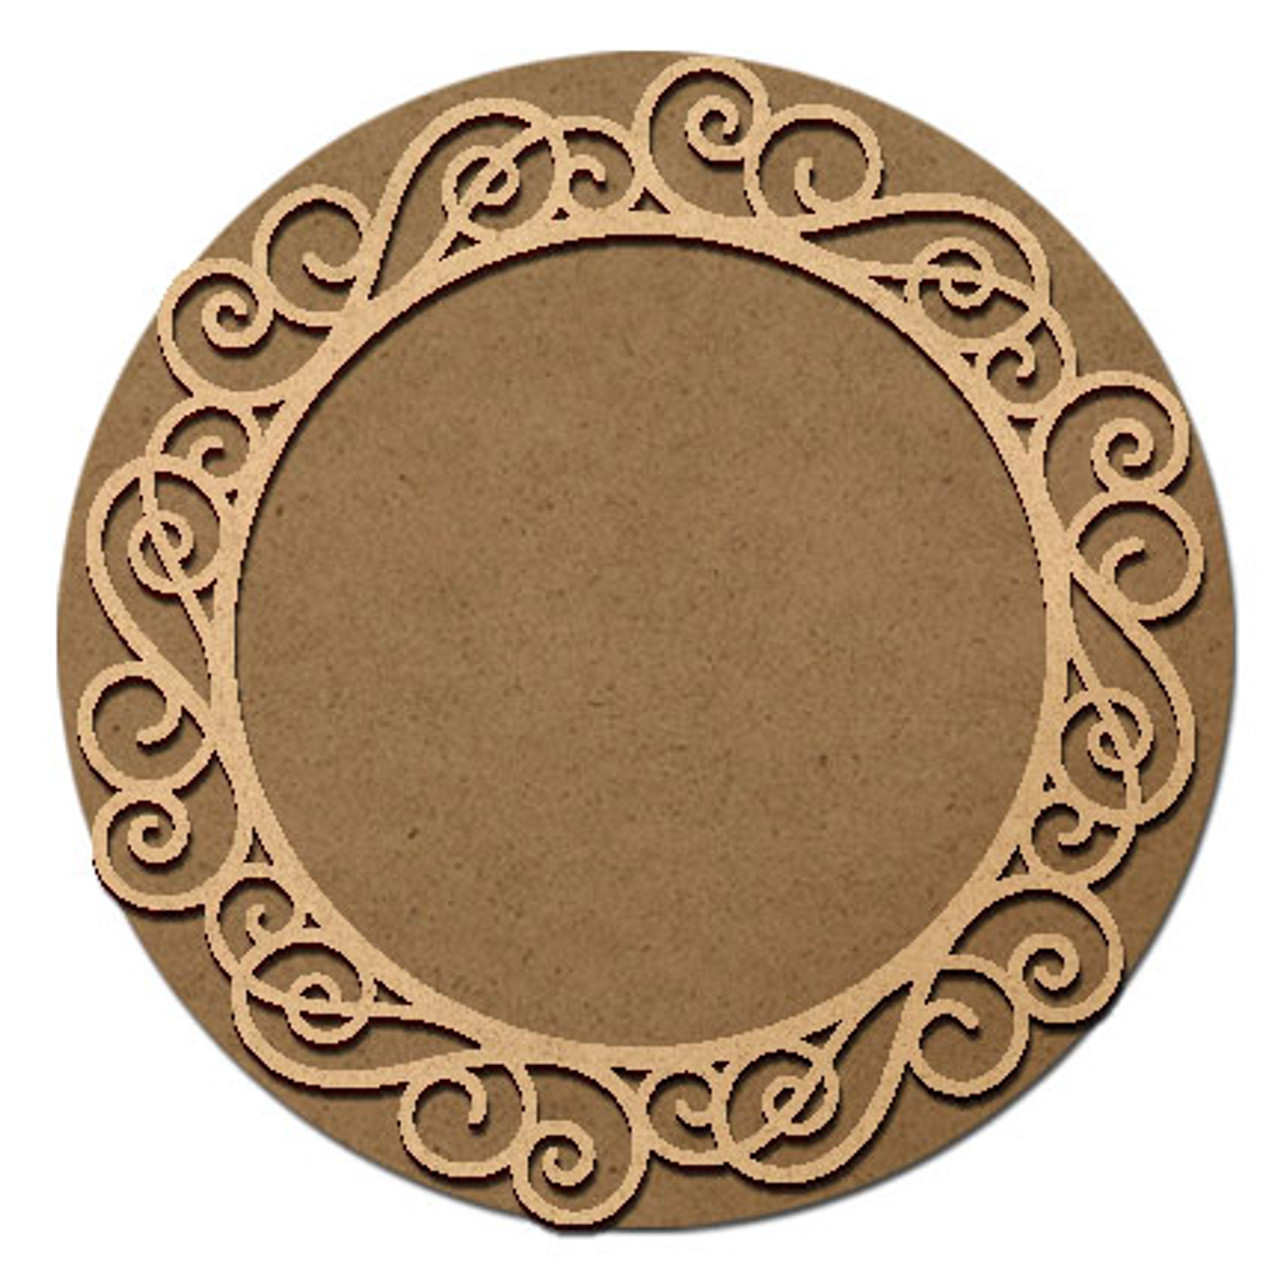 Round Whimsical Frame - MDF Surface & Embellished Scrolls Overlay - Ready to Paint Unfinished Wood for DIY Projects - Select Size - WDSF424